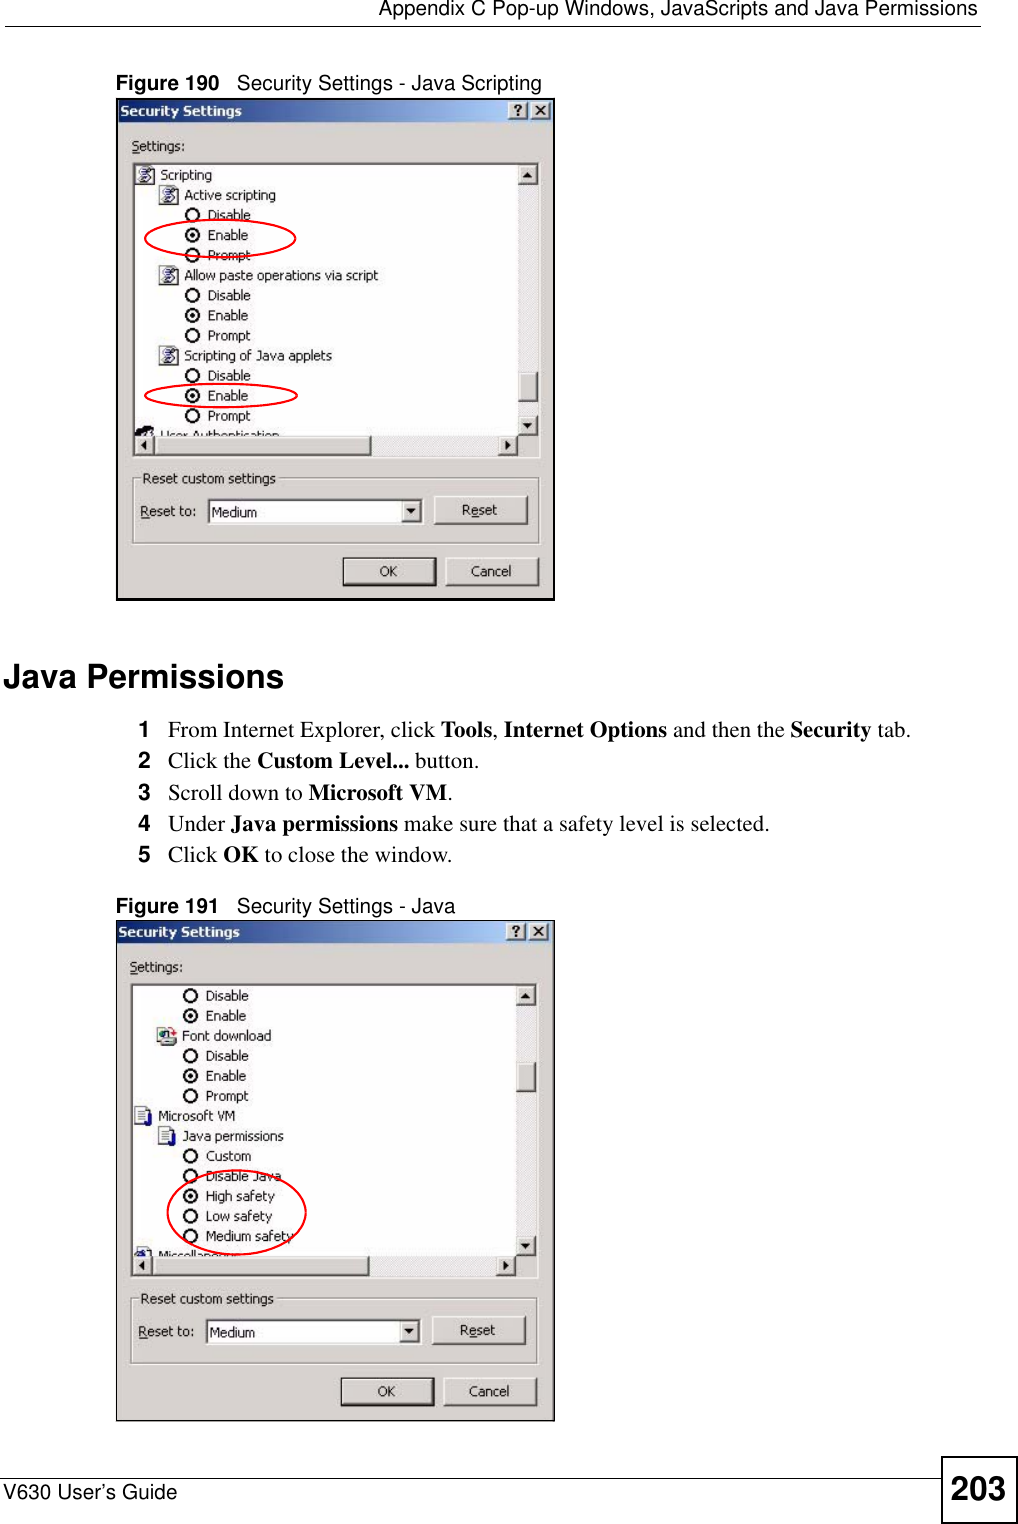  Appendix C Pop-up Windows, JavaScripts and Java PermissionsV630 User’s Guide 203Figure 190   Security Settings - Java ScriptingJava Permissions1From Internet Explorer, click Tools, Internet Options and then the Security tab. 2Click the Custom Level... button. 3Scroll down to Microsoft VM. 4Under Java permissions make sure that a safety level is selected.5Click OK to close the window.Figure 191   Security Settings - Java 